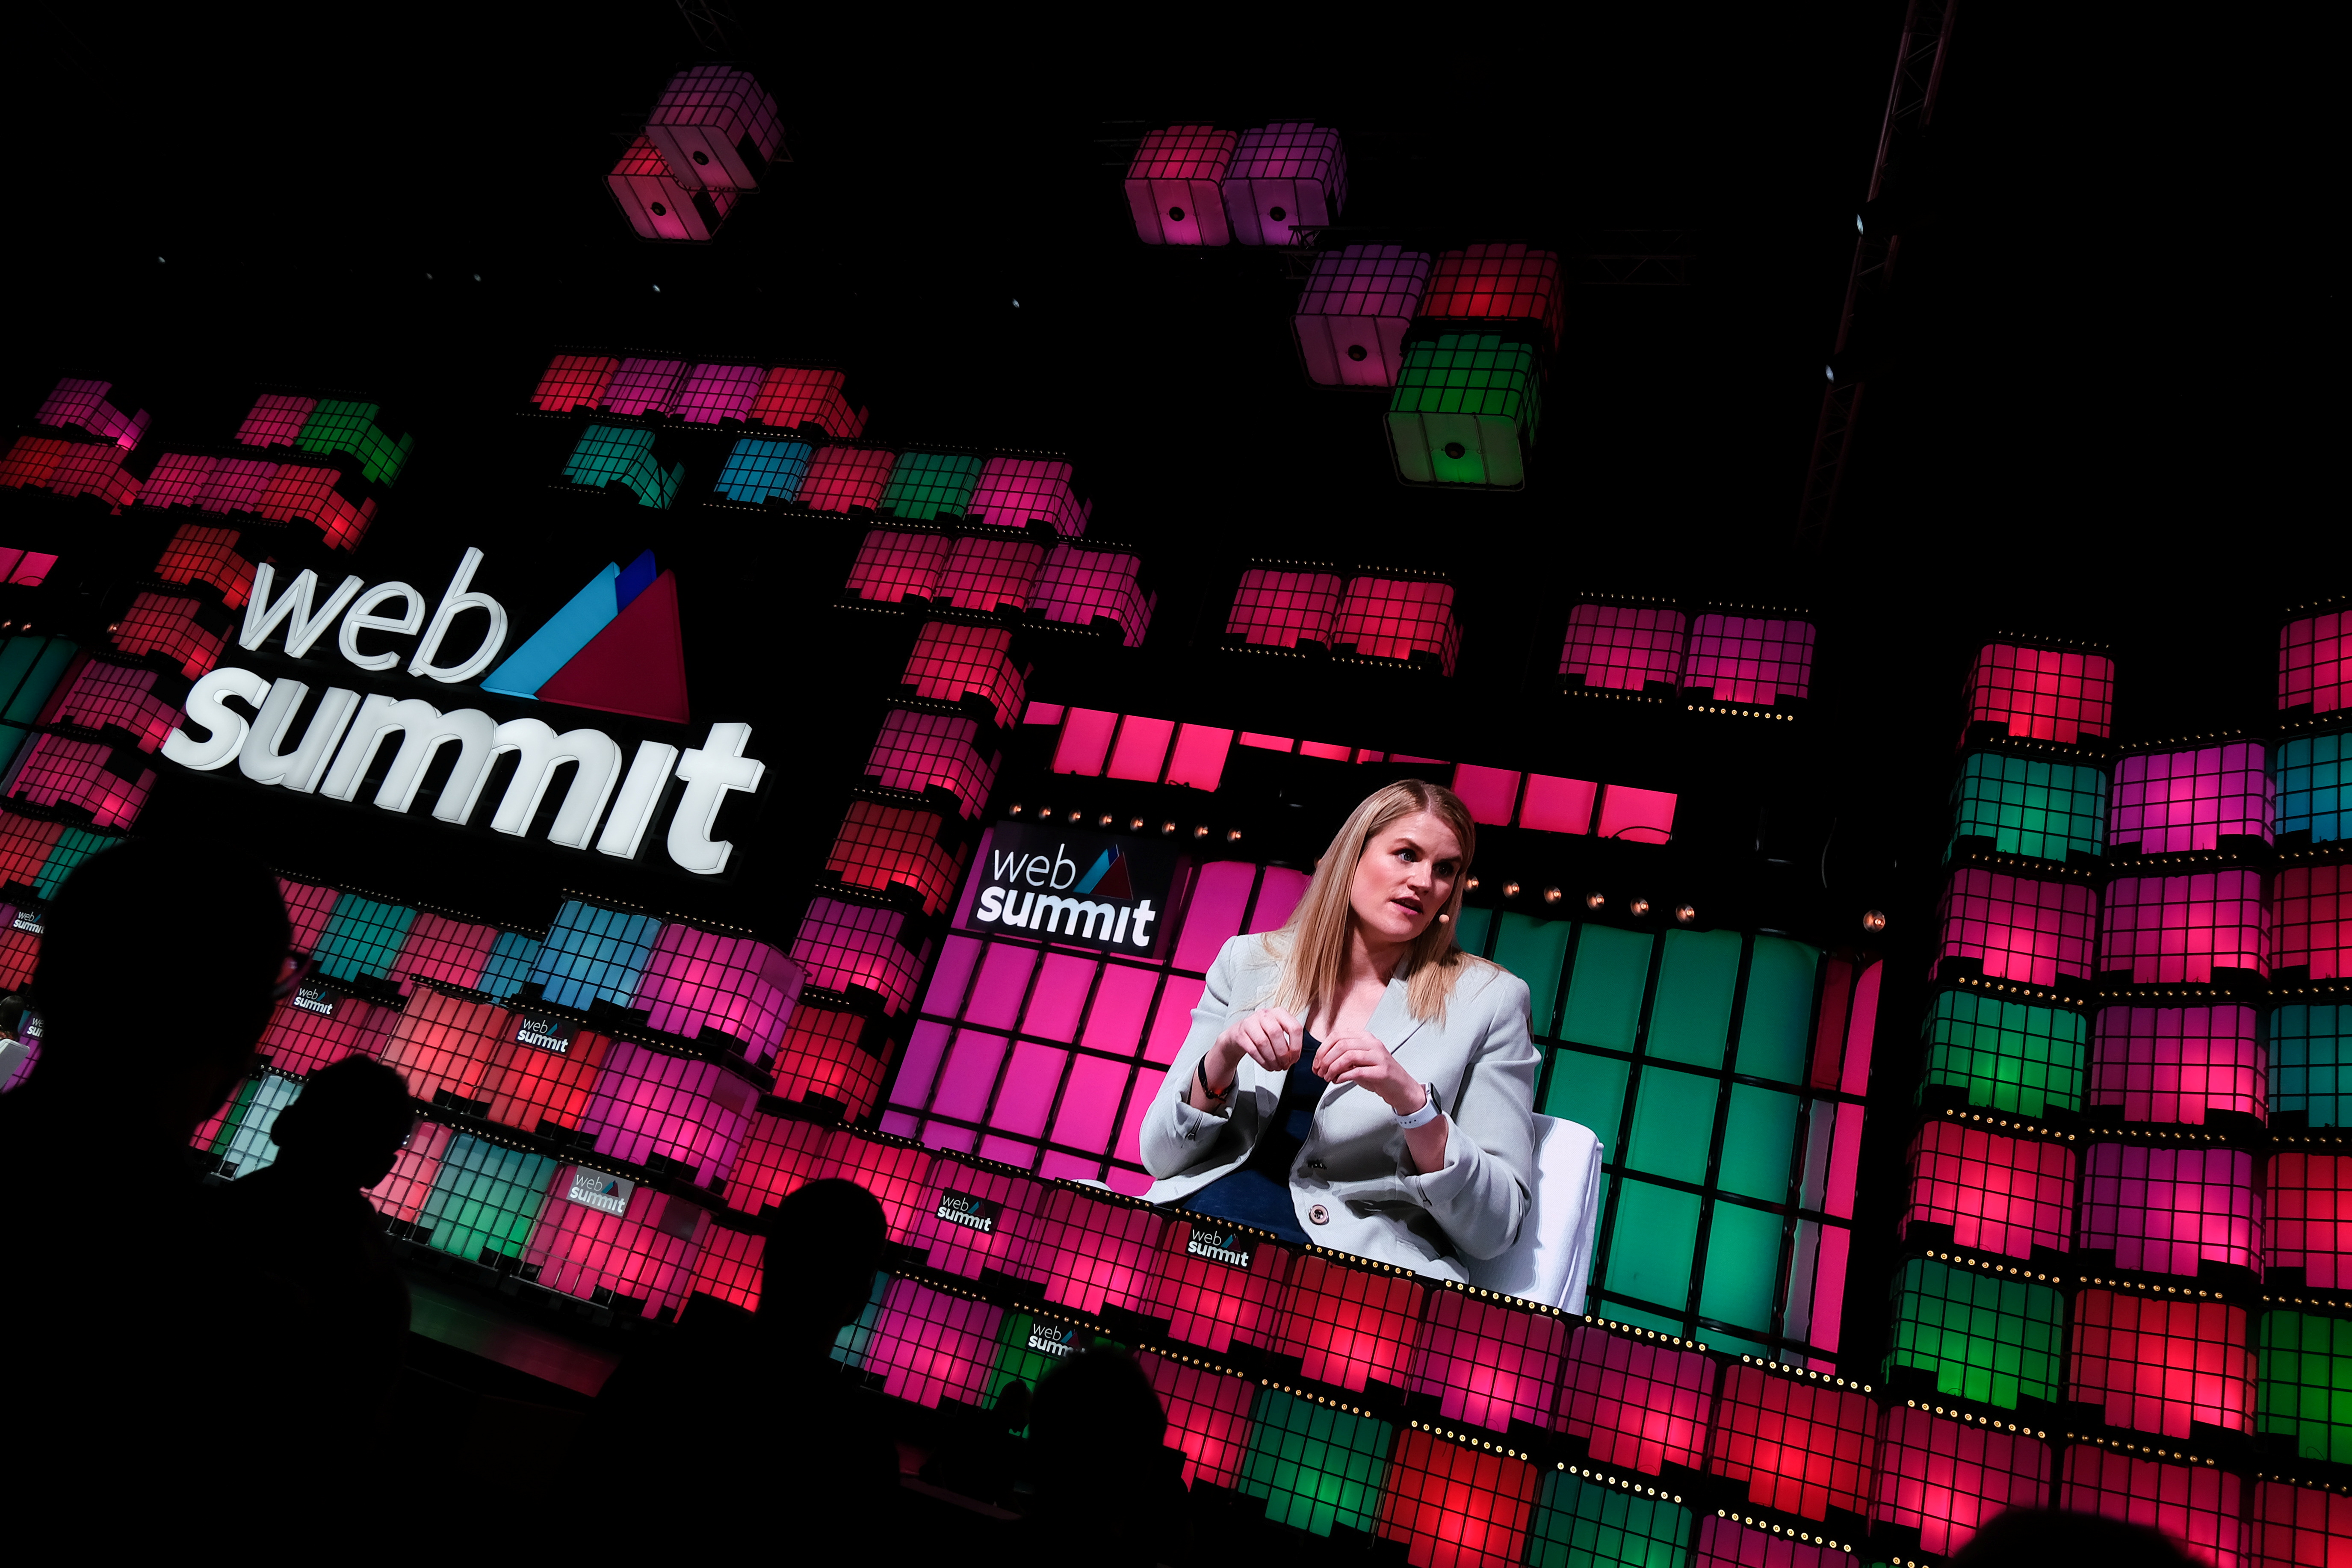 The Facebook Whistleblower Frances Haugen speaks during the opening ceremony of Web Summit, Europe's largest technology conference, in Lisbon, Portugal, November 1, 2021. REUTERS/Pedro Nunes